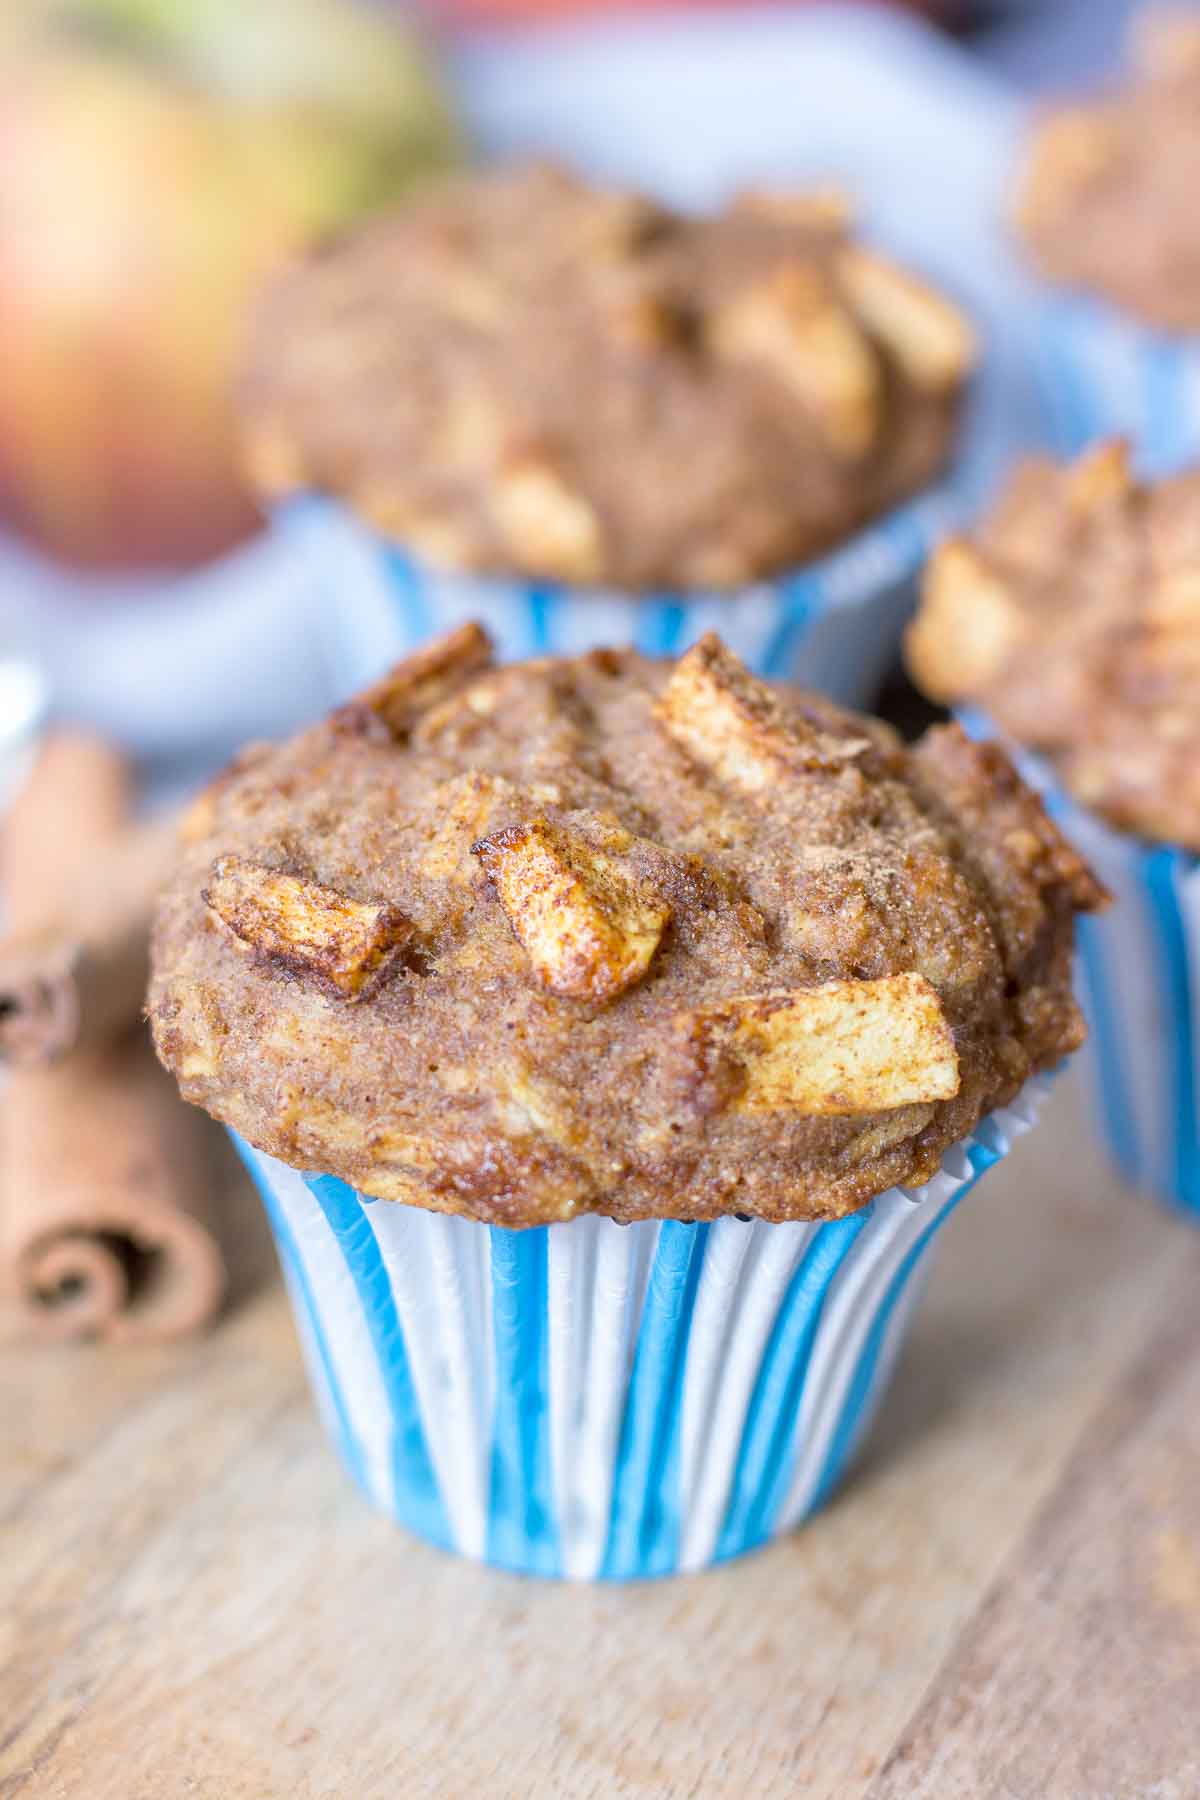 Apple Cinnamon Muffins served on a wooden plate